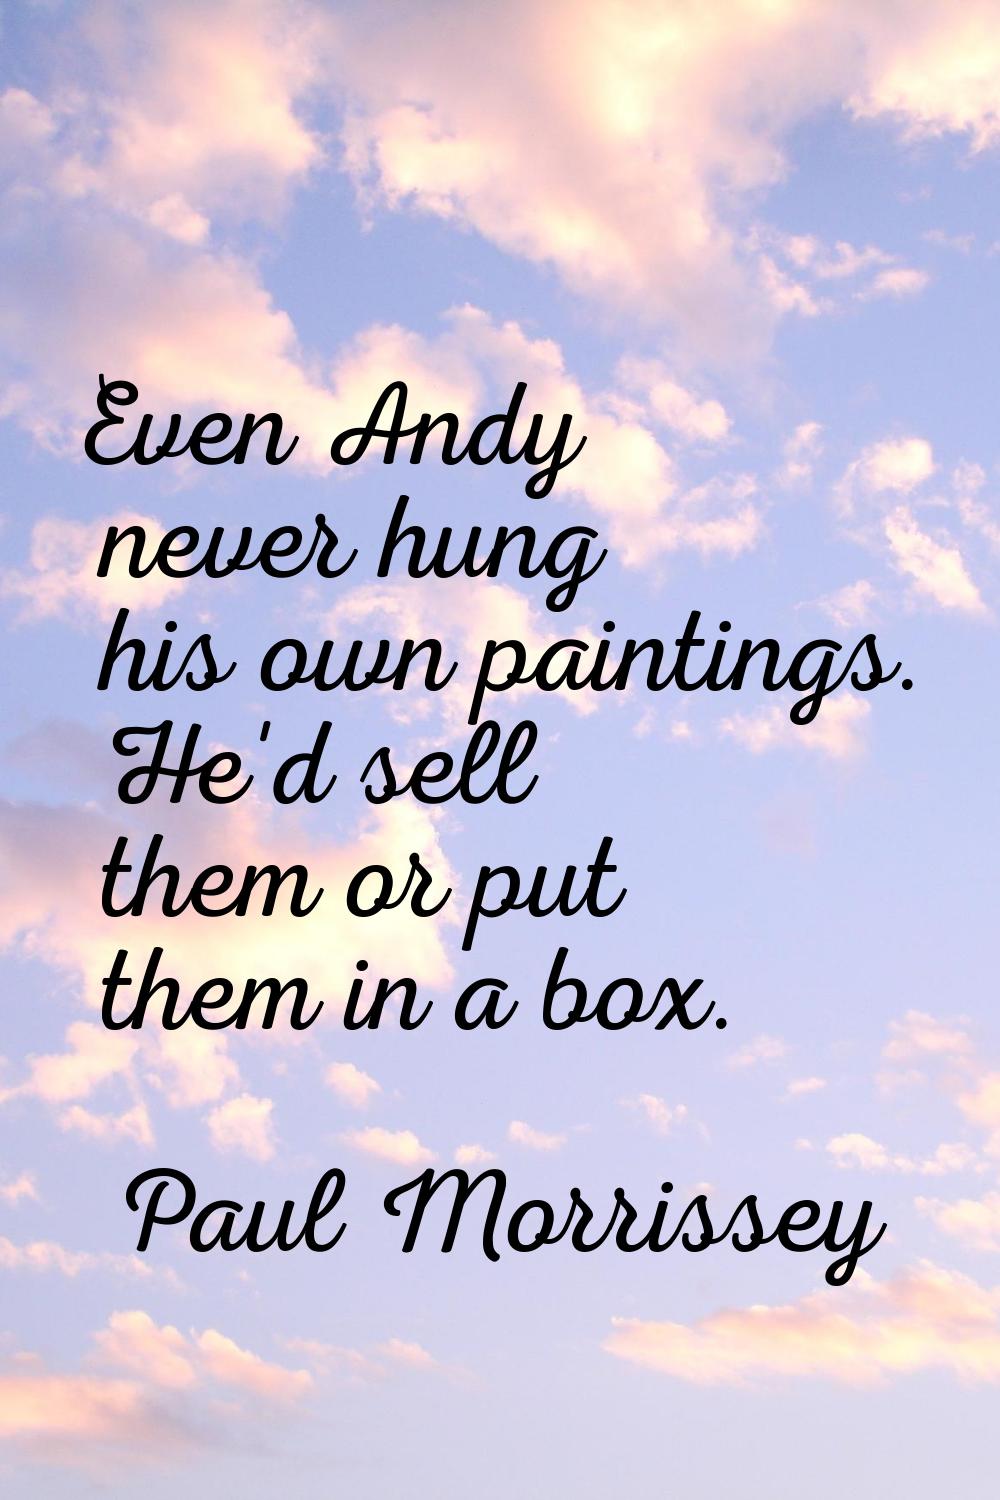 Even Andy never hung his own paintings. He'd sell them or put them in a box.